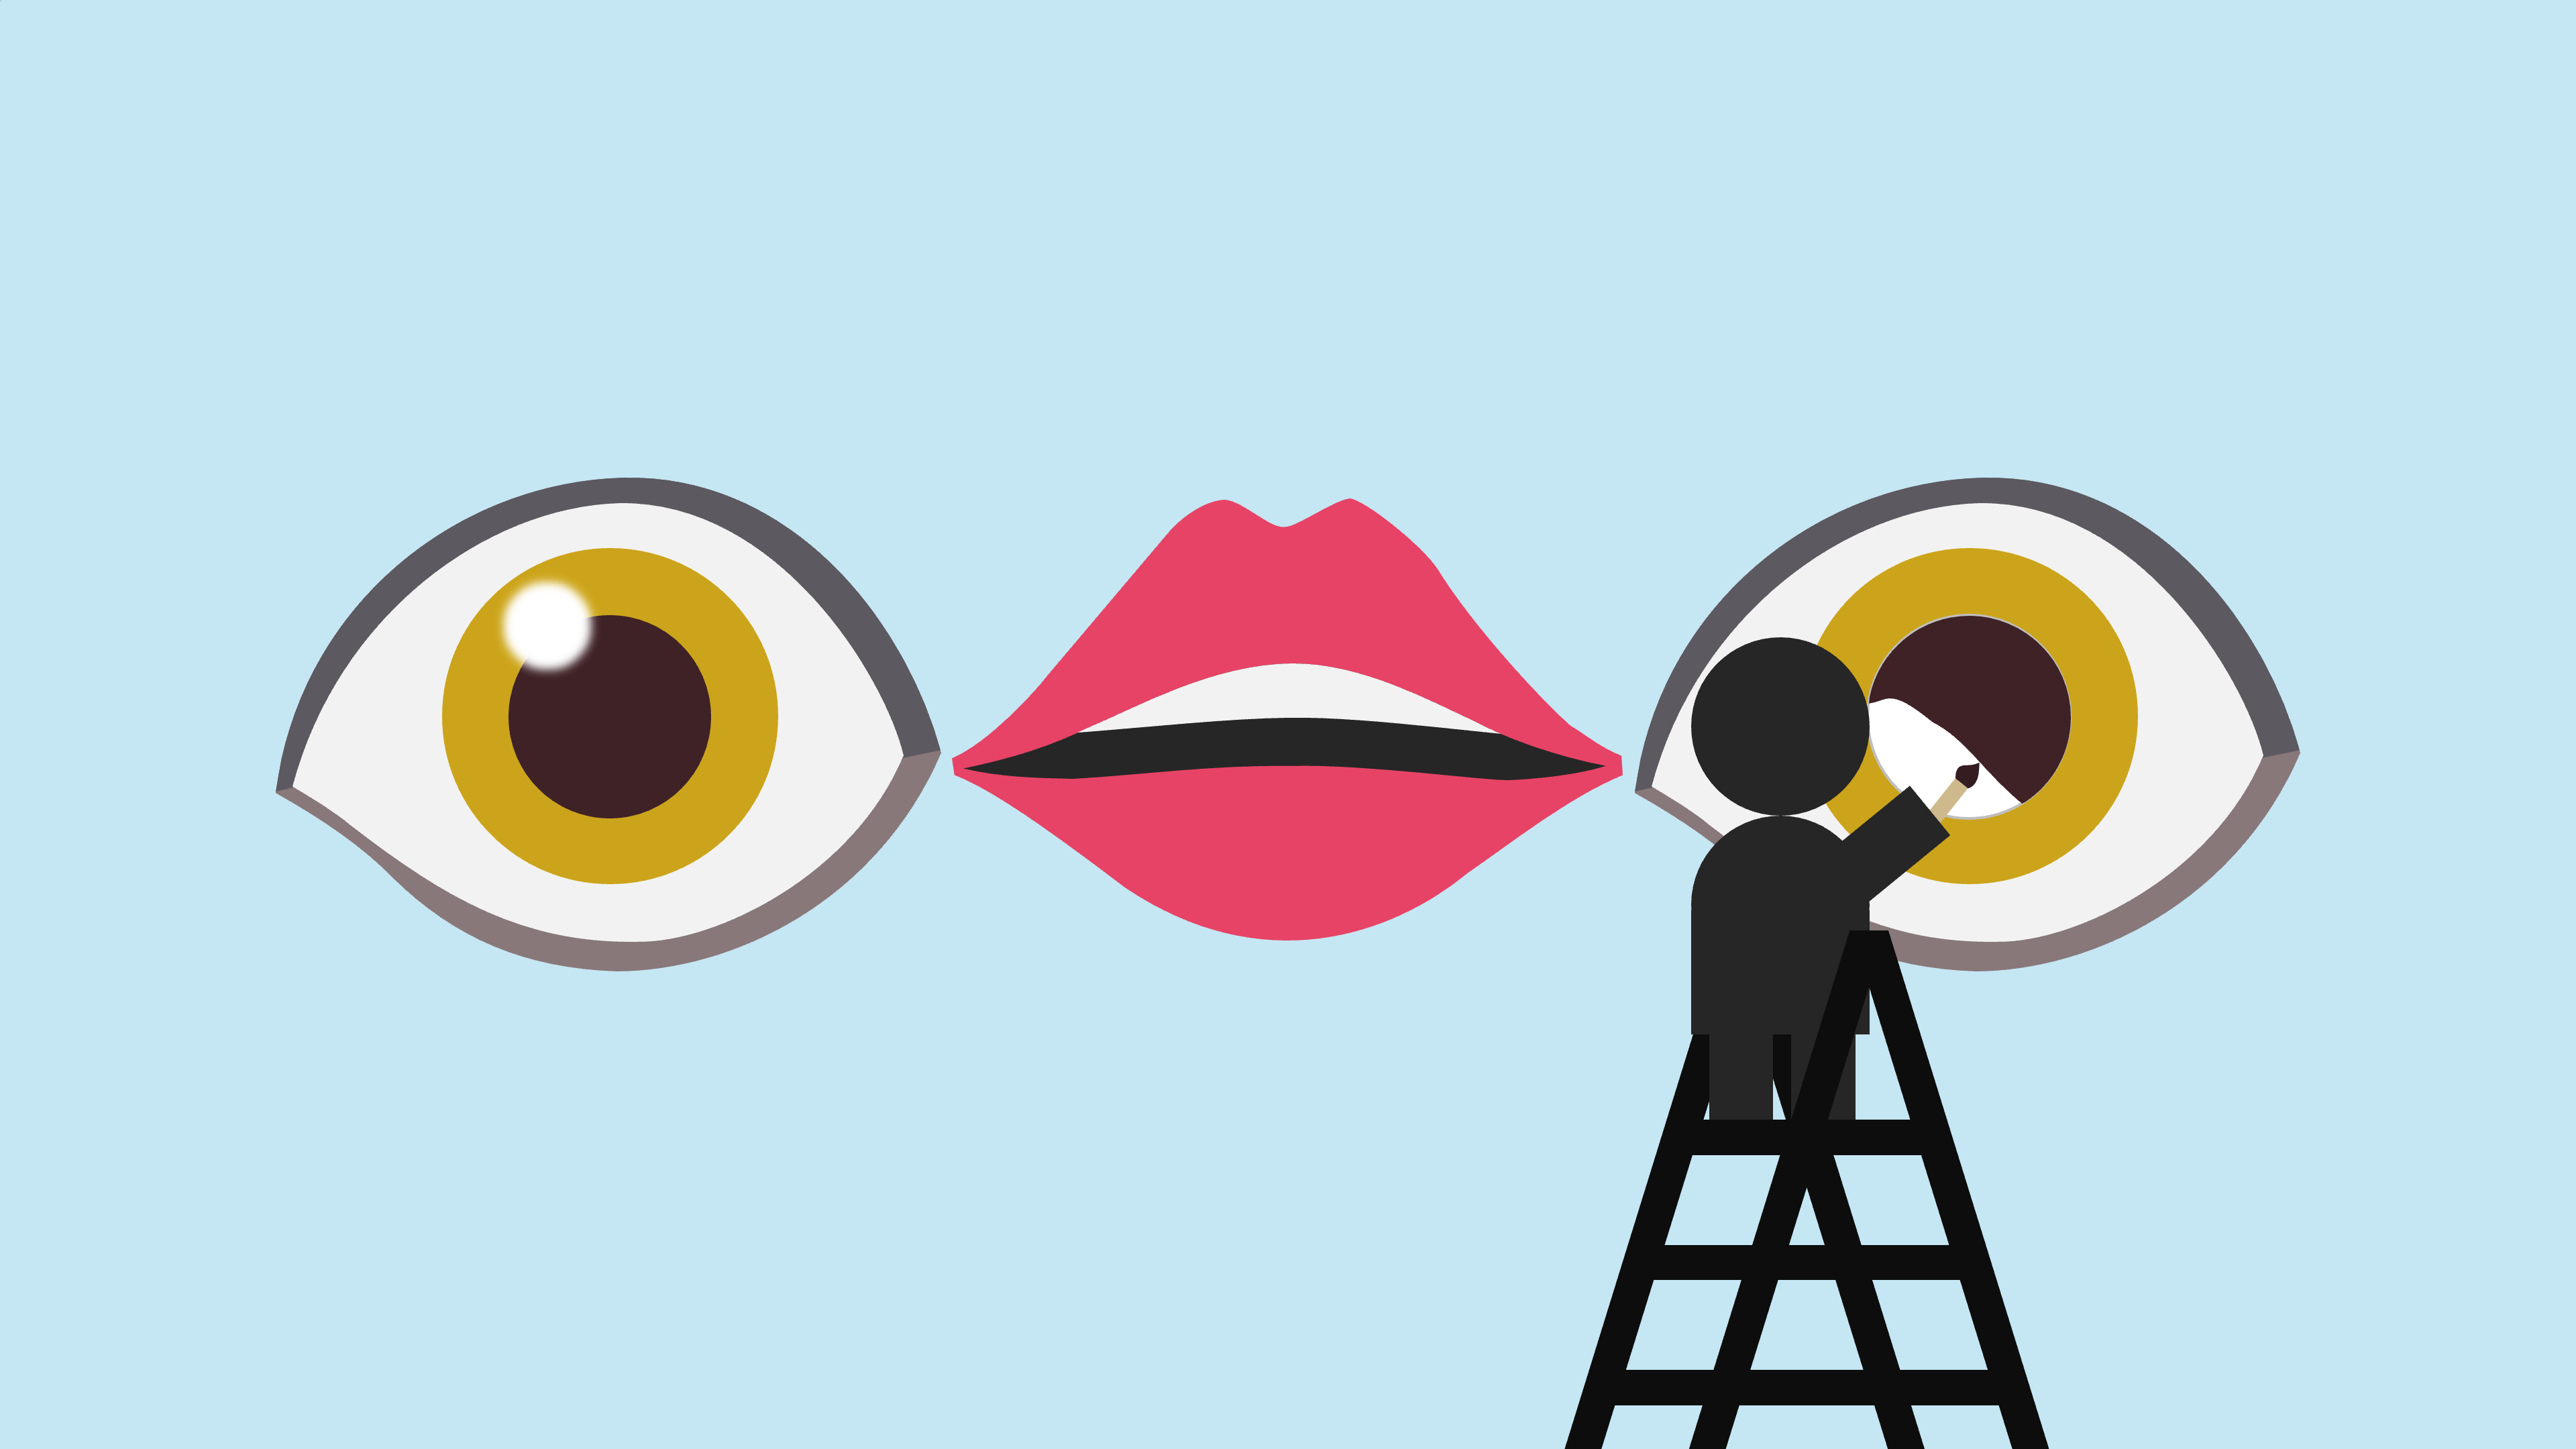 “👁️👄👁️” being painted